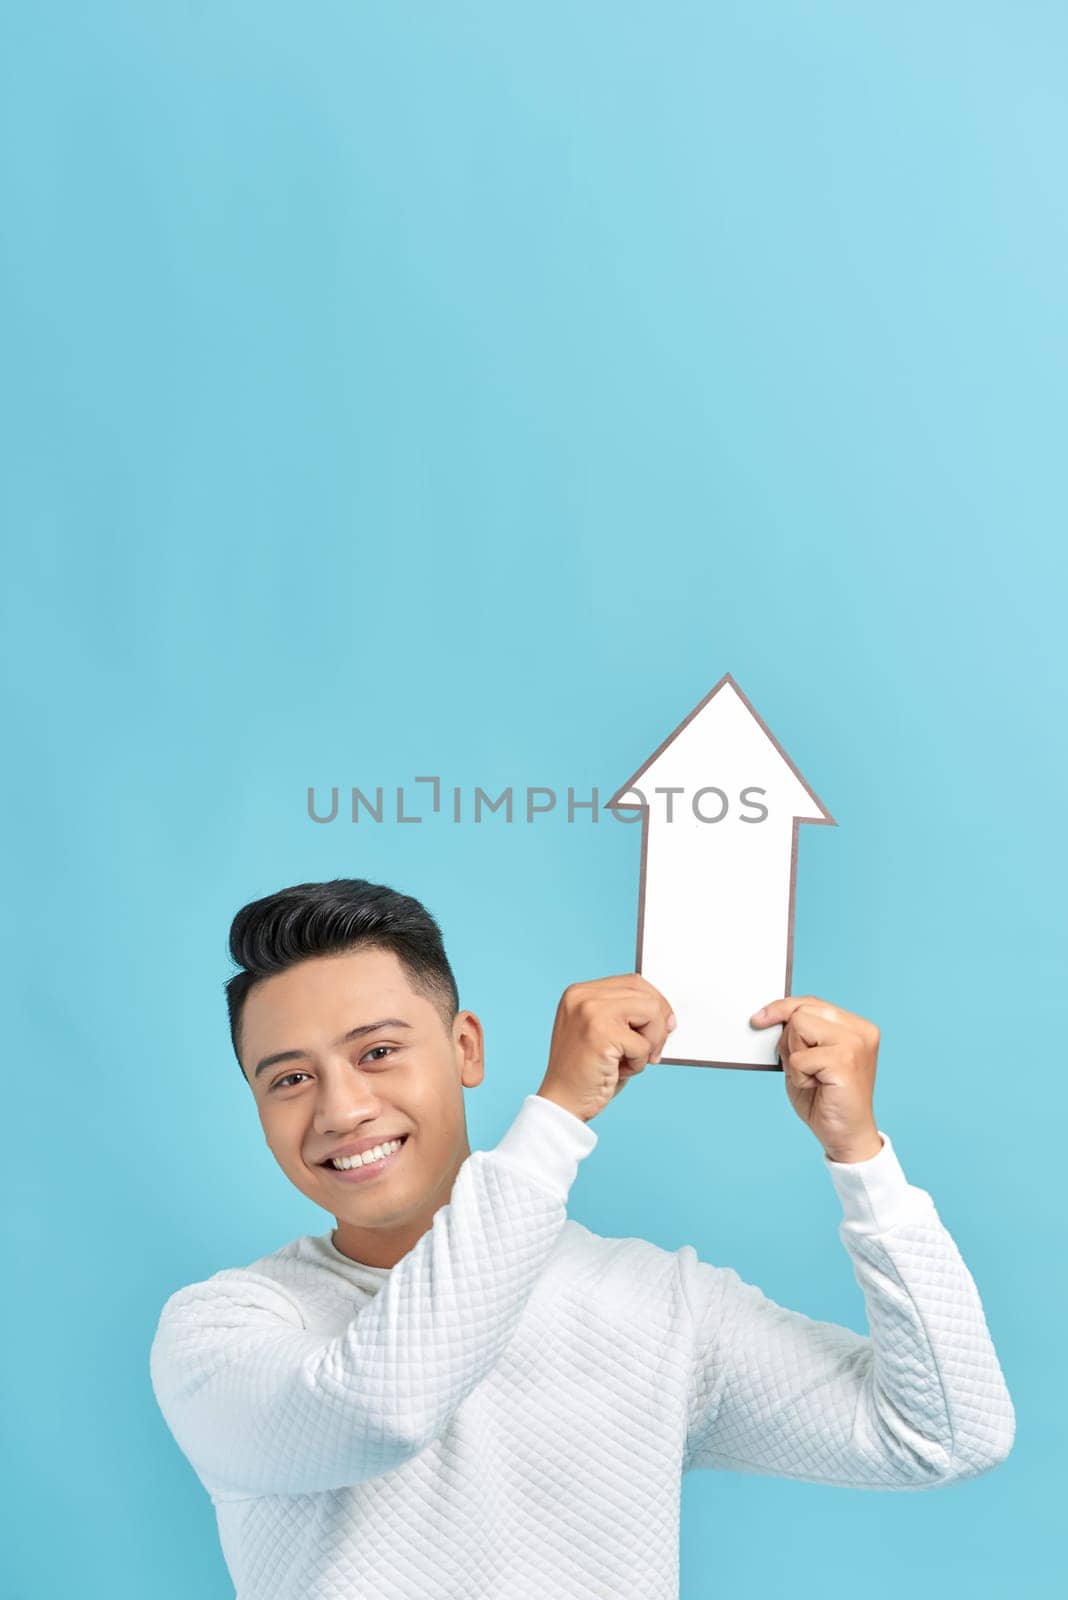 Smiling man holding white arrow isolated on a blue background